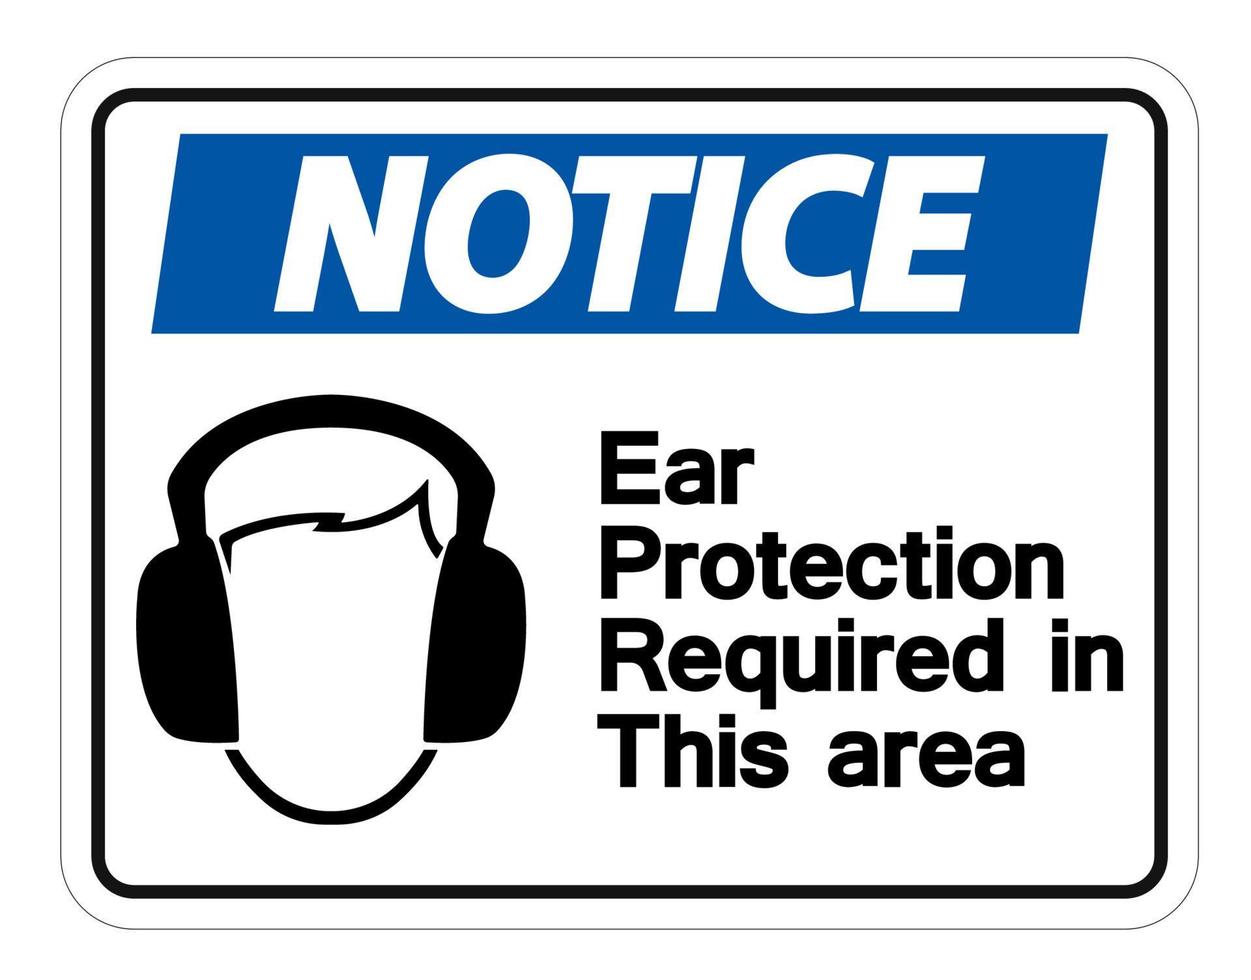 Notice Ear Protection Required In This Area Symbol Sign on transparent background,Vector Illustration vector